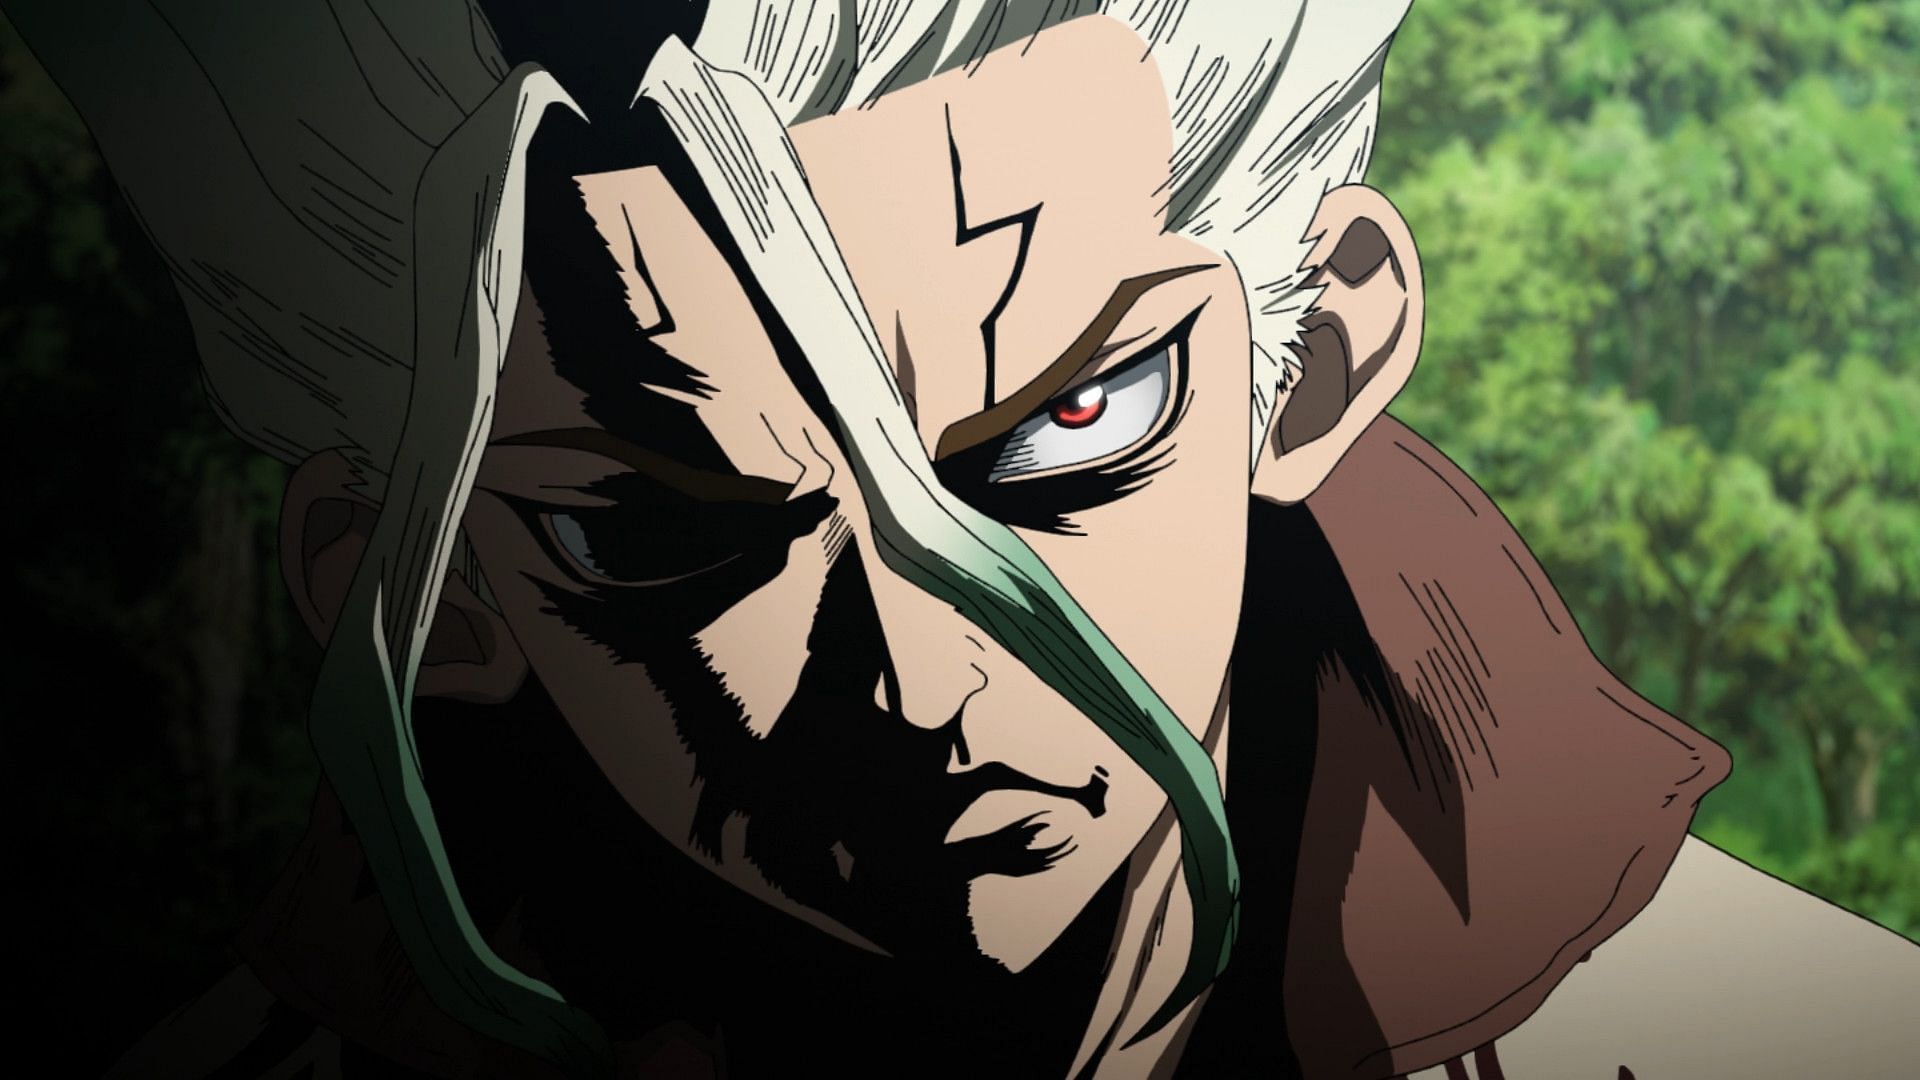 Dr. Stone Season 3 Episode 14: Deal Game begins; here's everything to know